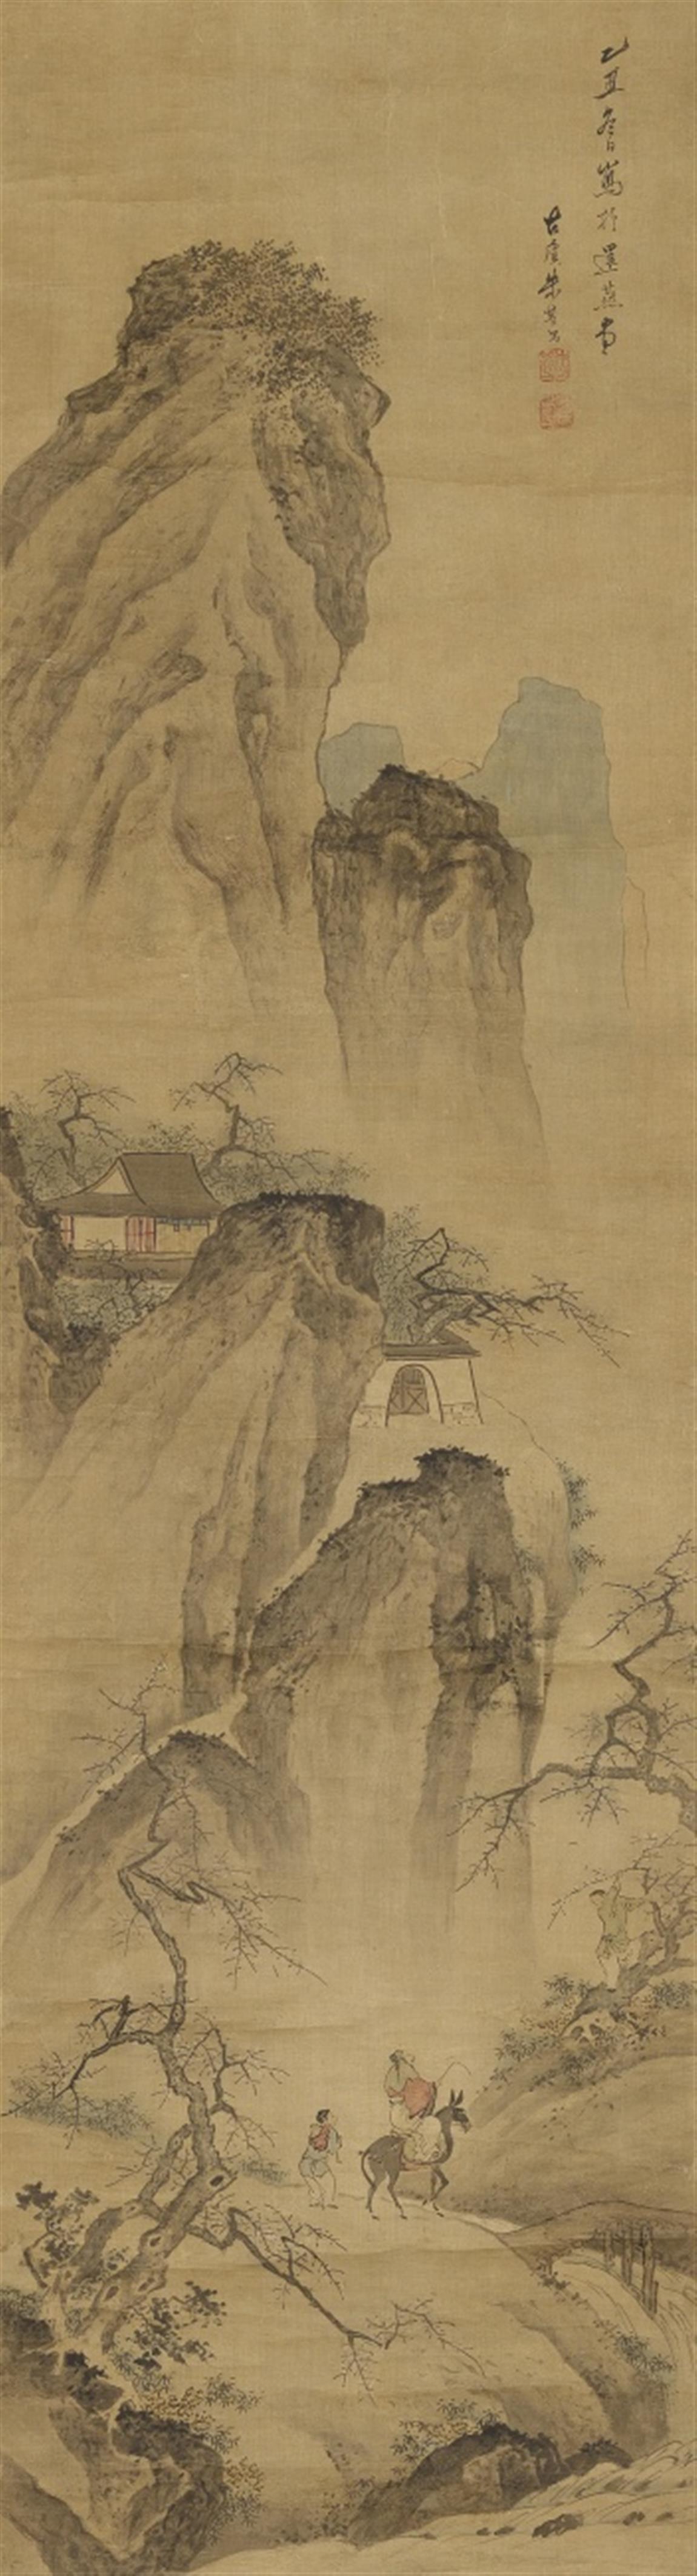 Zhu Qichang . Qing dynasty - Traveller in a landscape. Hanging scroll. Ink and colour on silk. Inscription, dated cyclically yichou (1805), signed Zhu Qichang and sealed Zhu Qichang yin and one more seal. - image-1